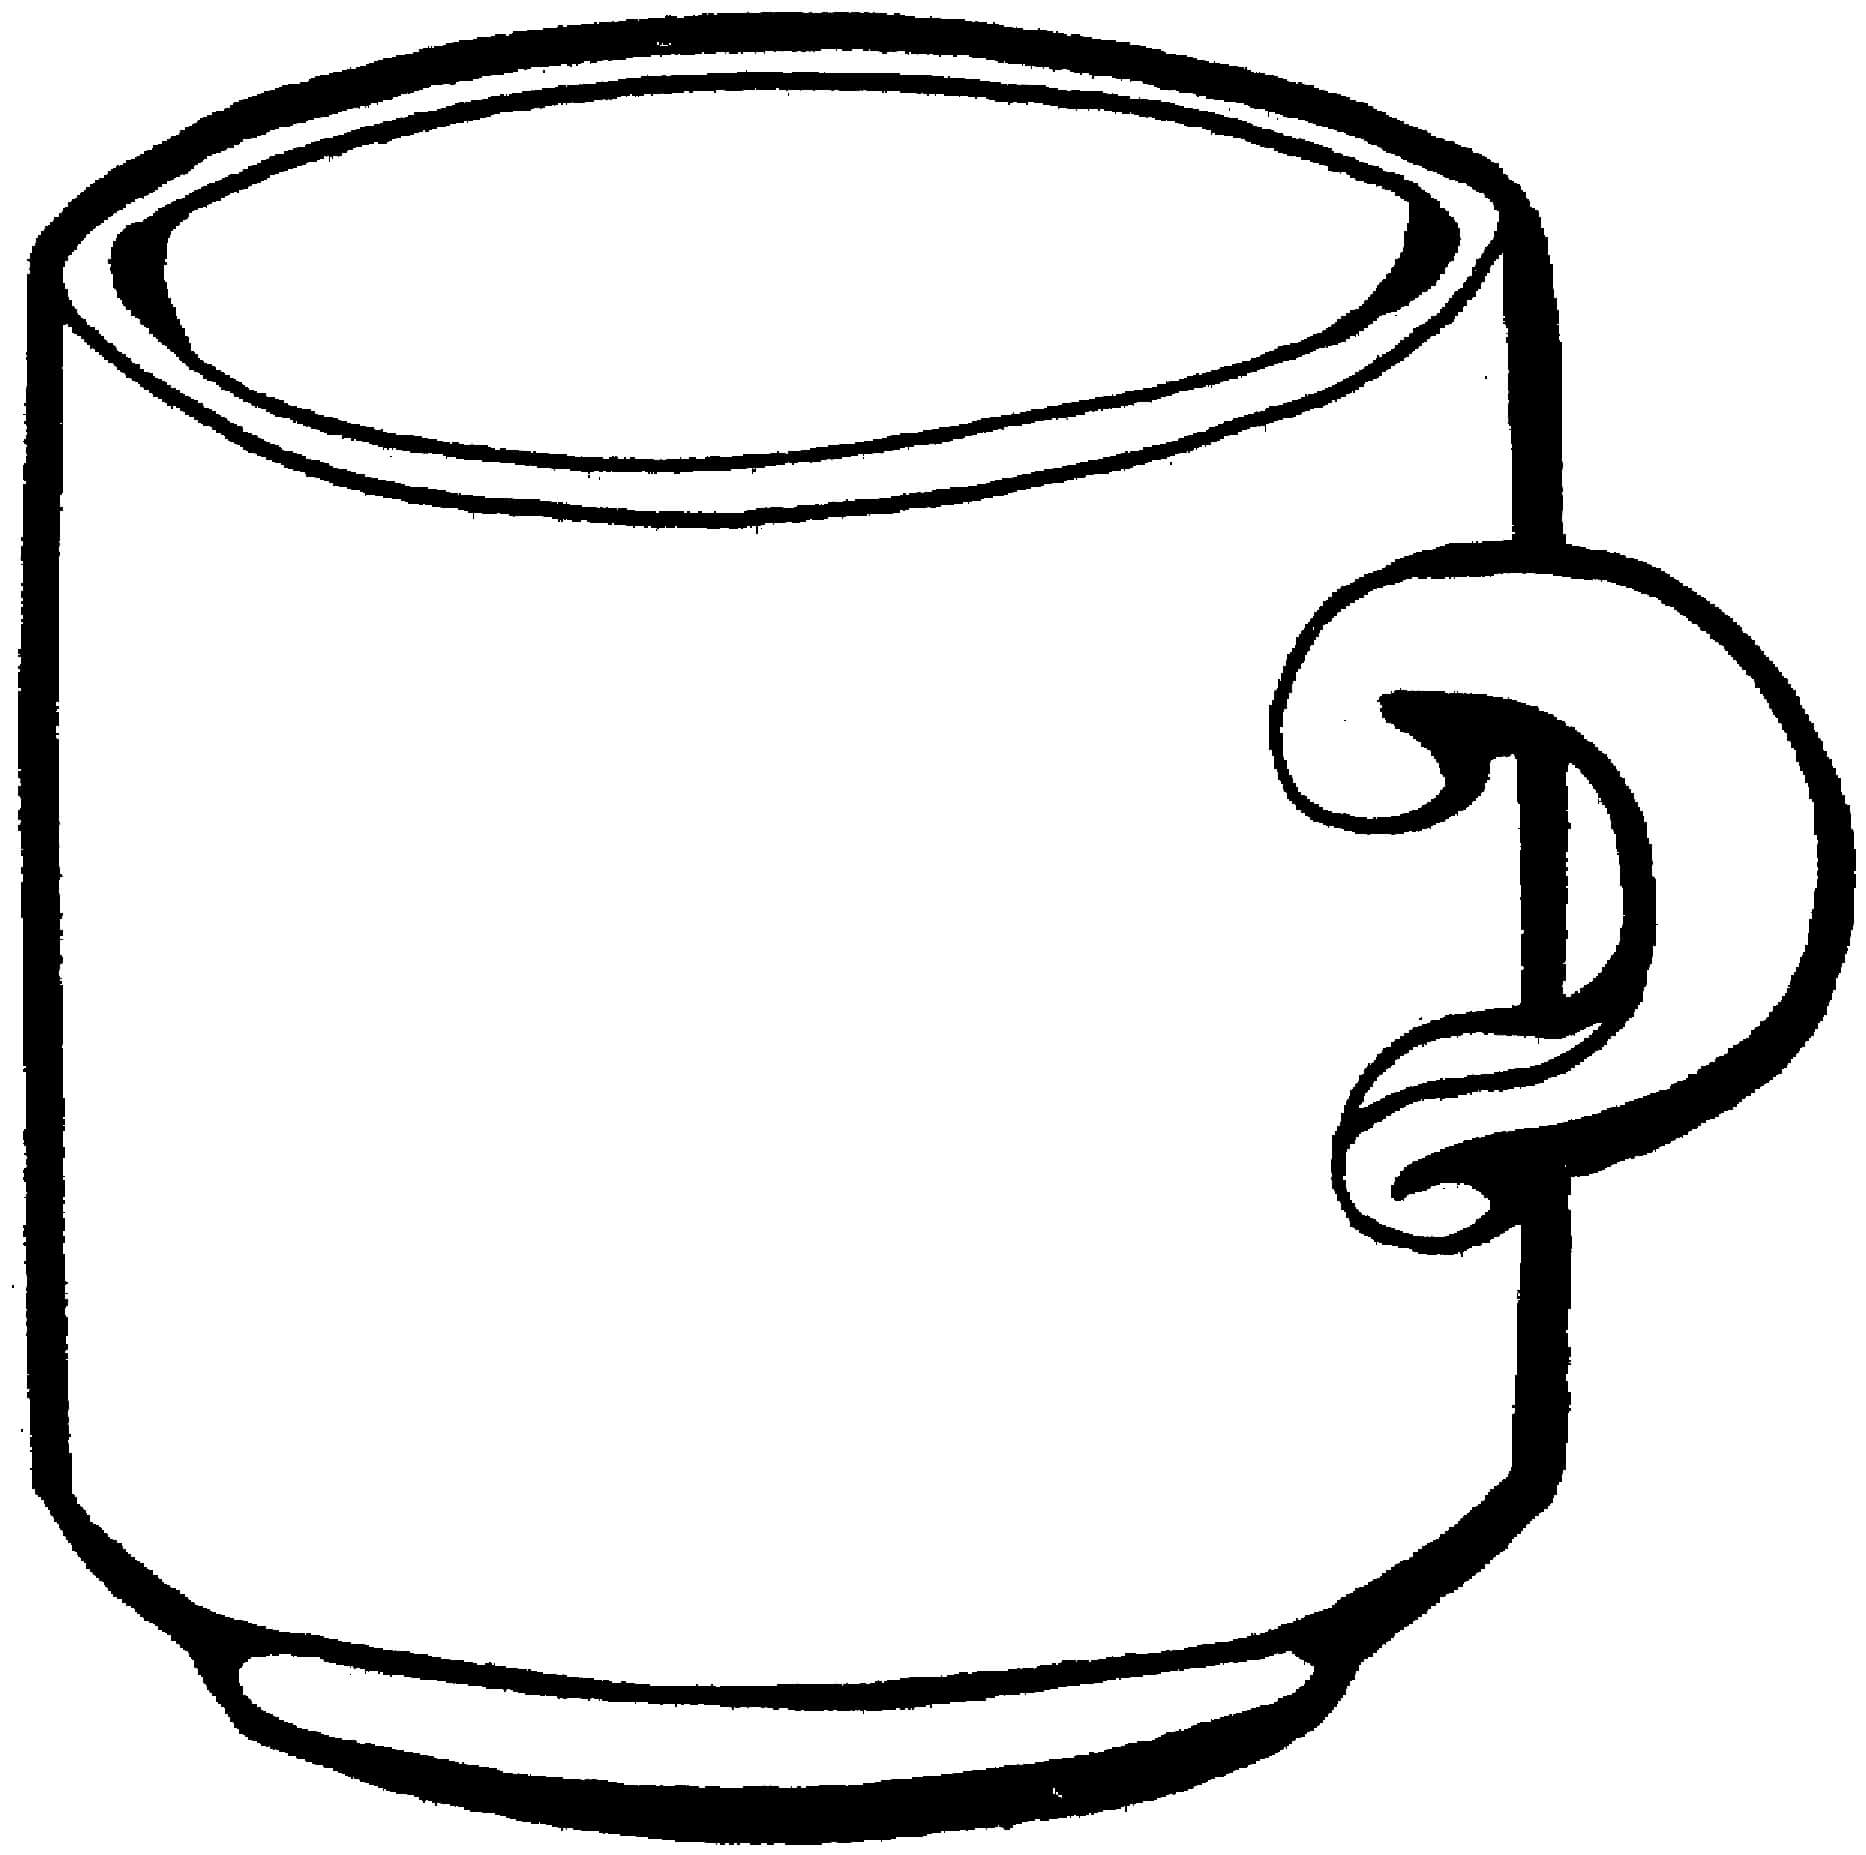 coffee cup coloring pages